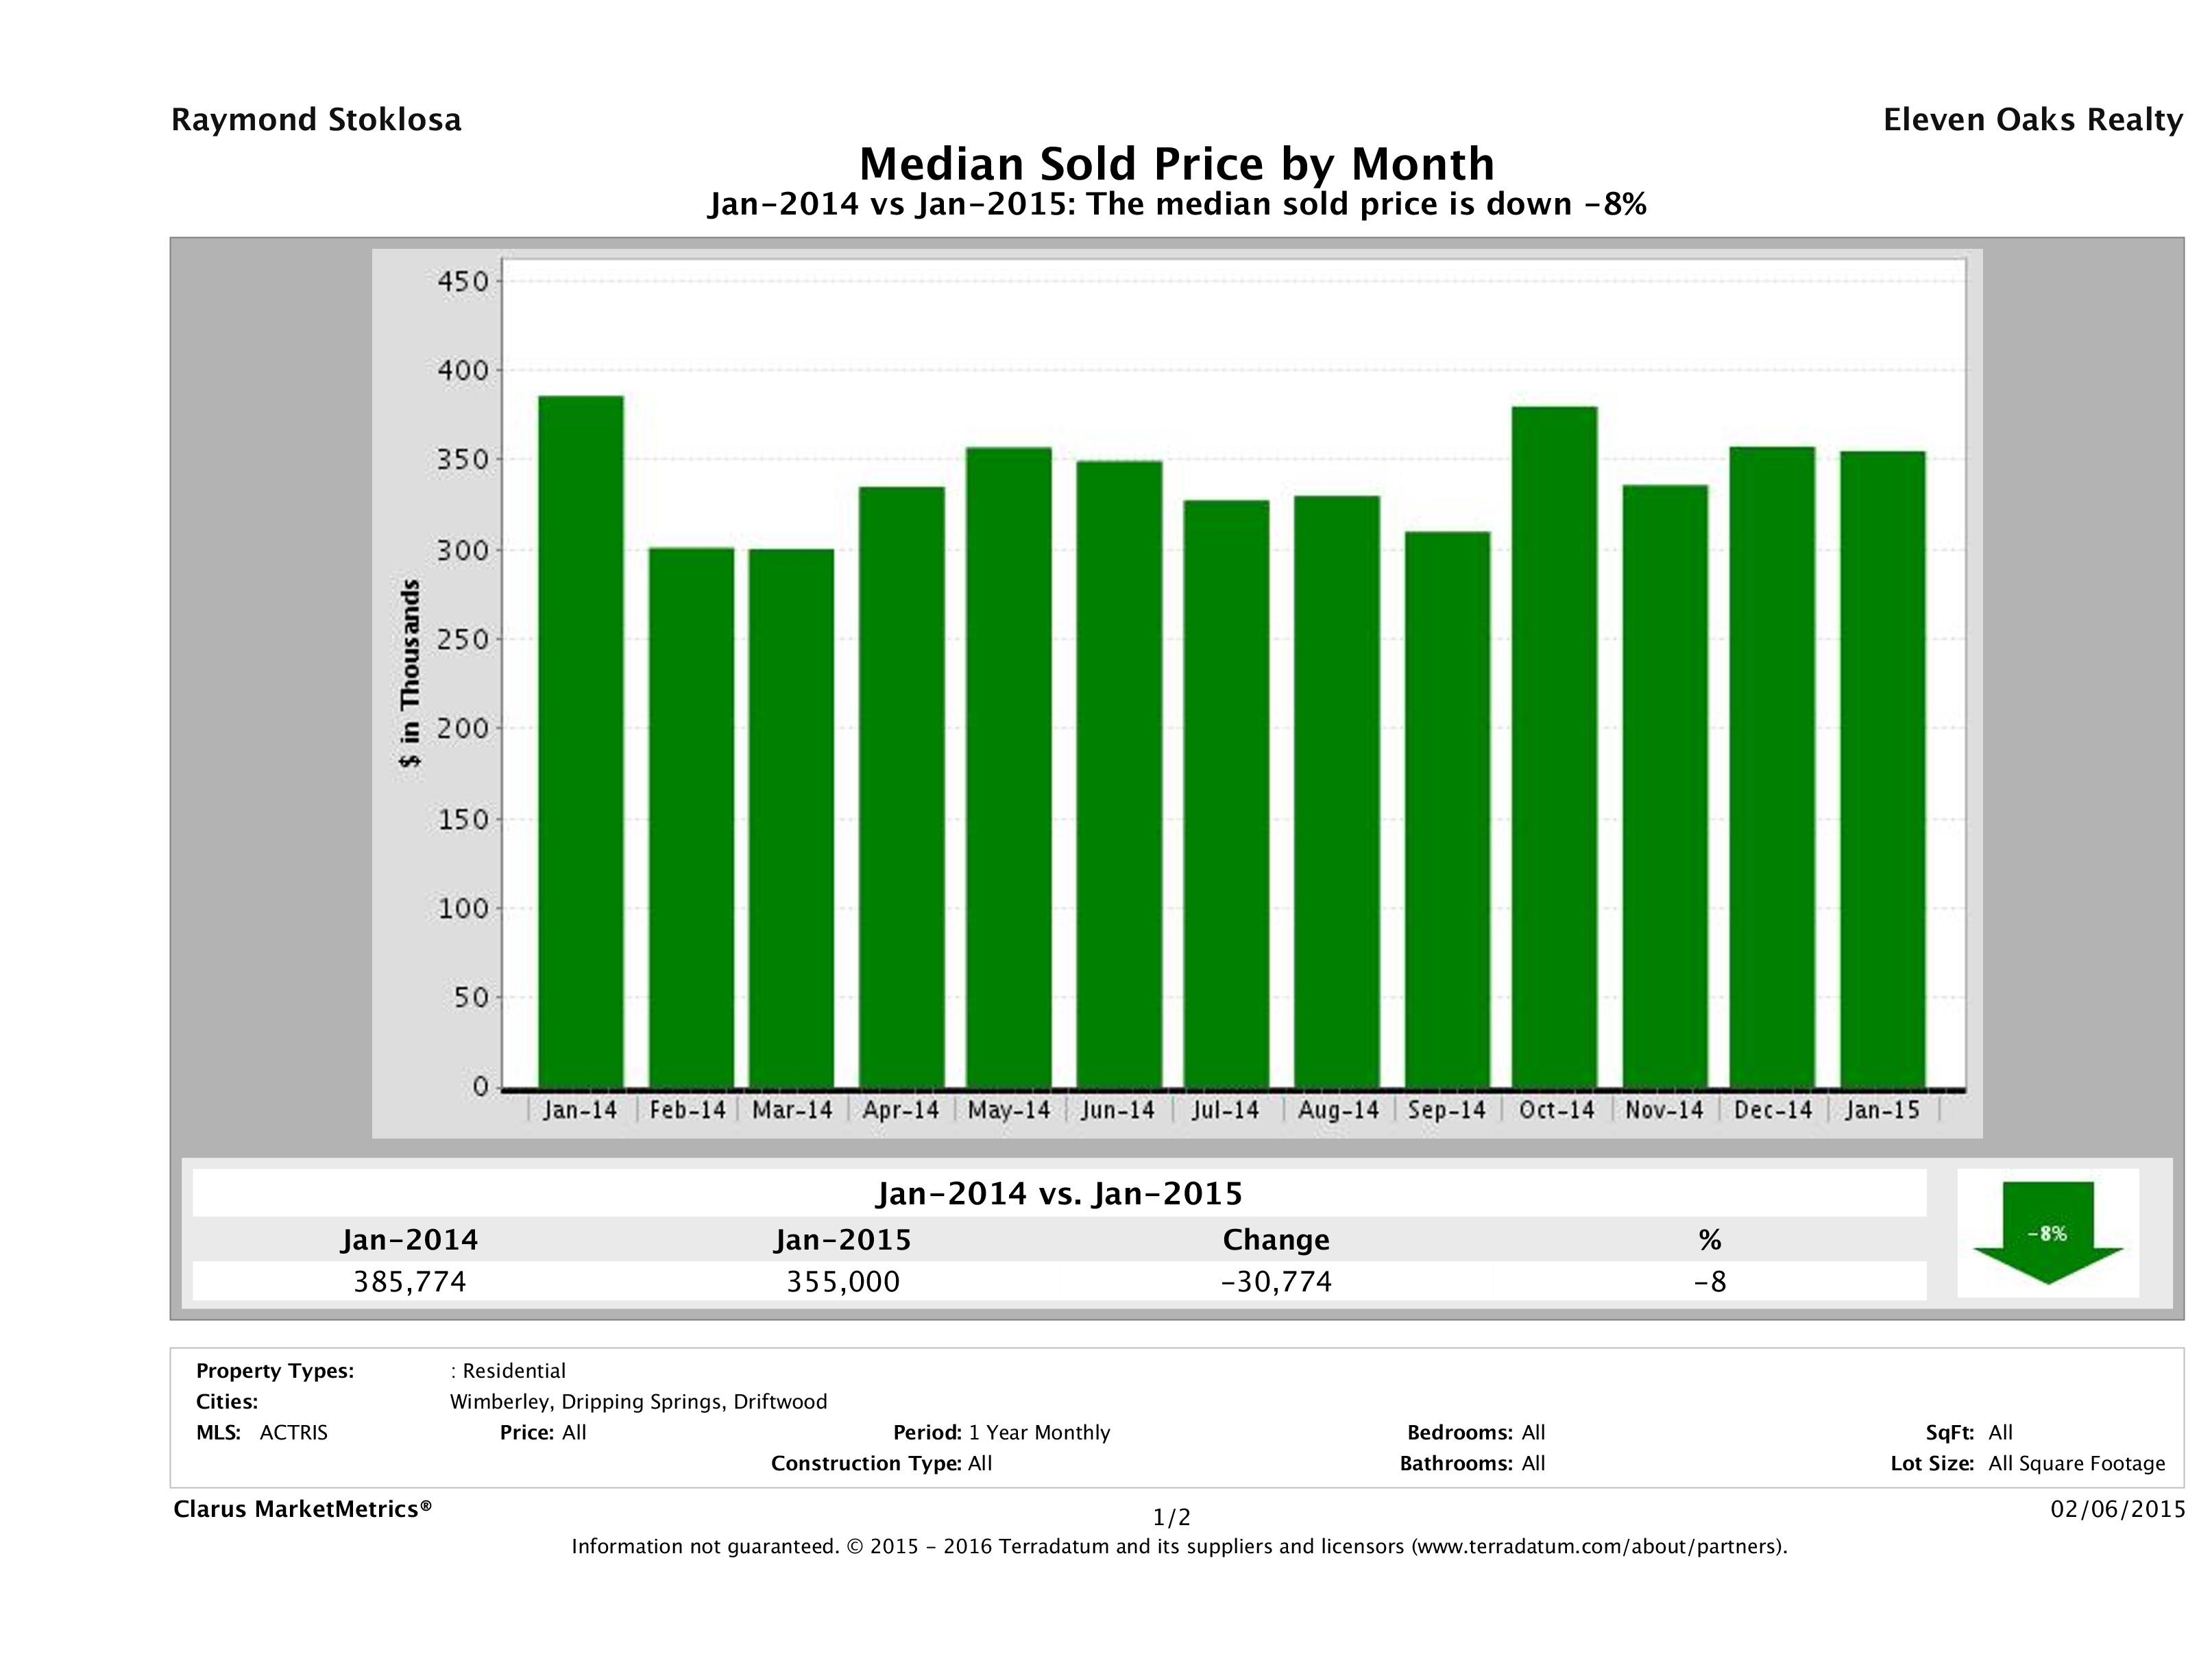 Hill Country median home price January 2015